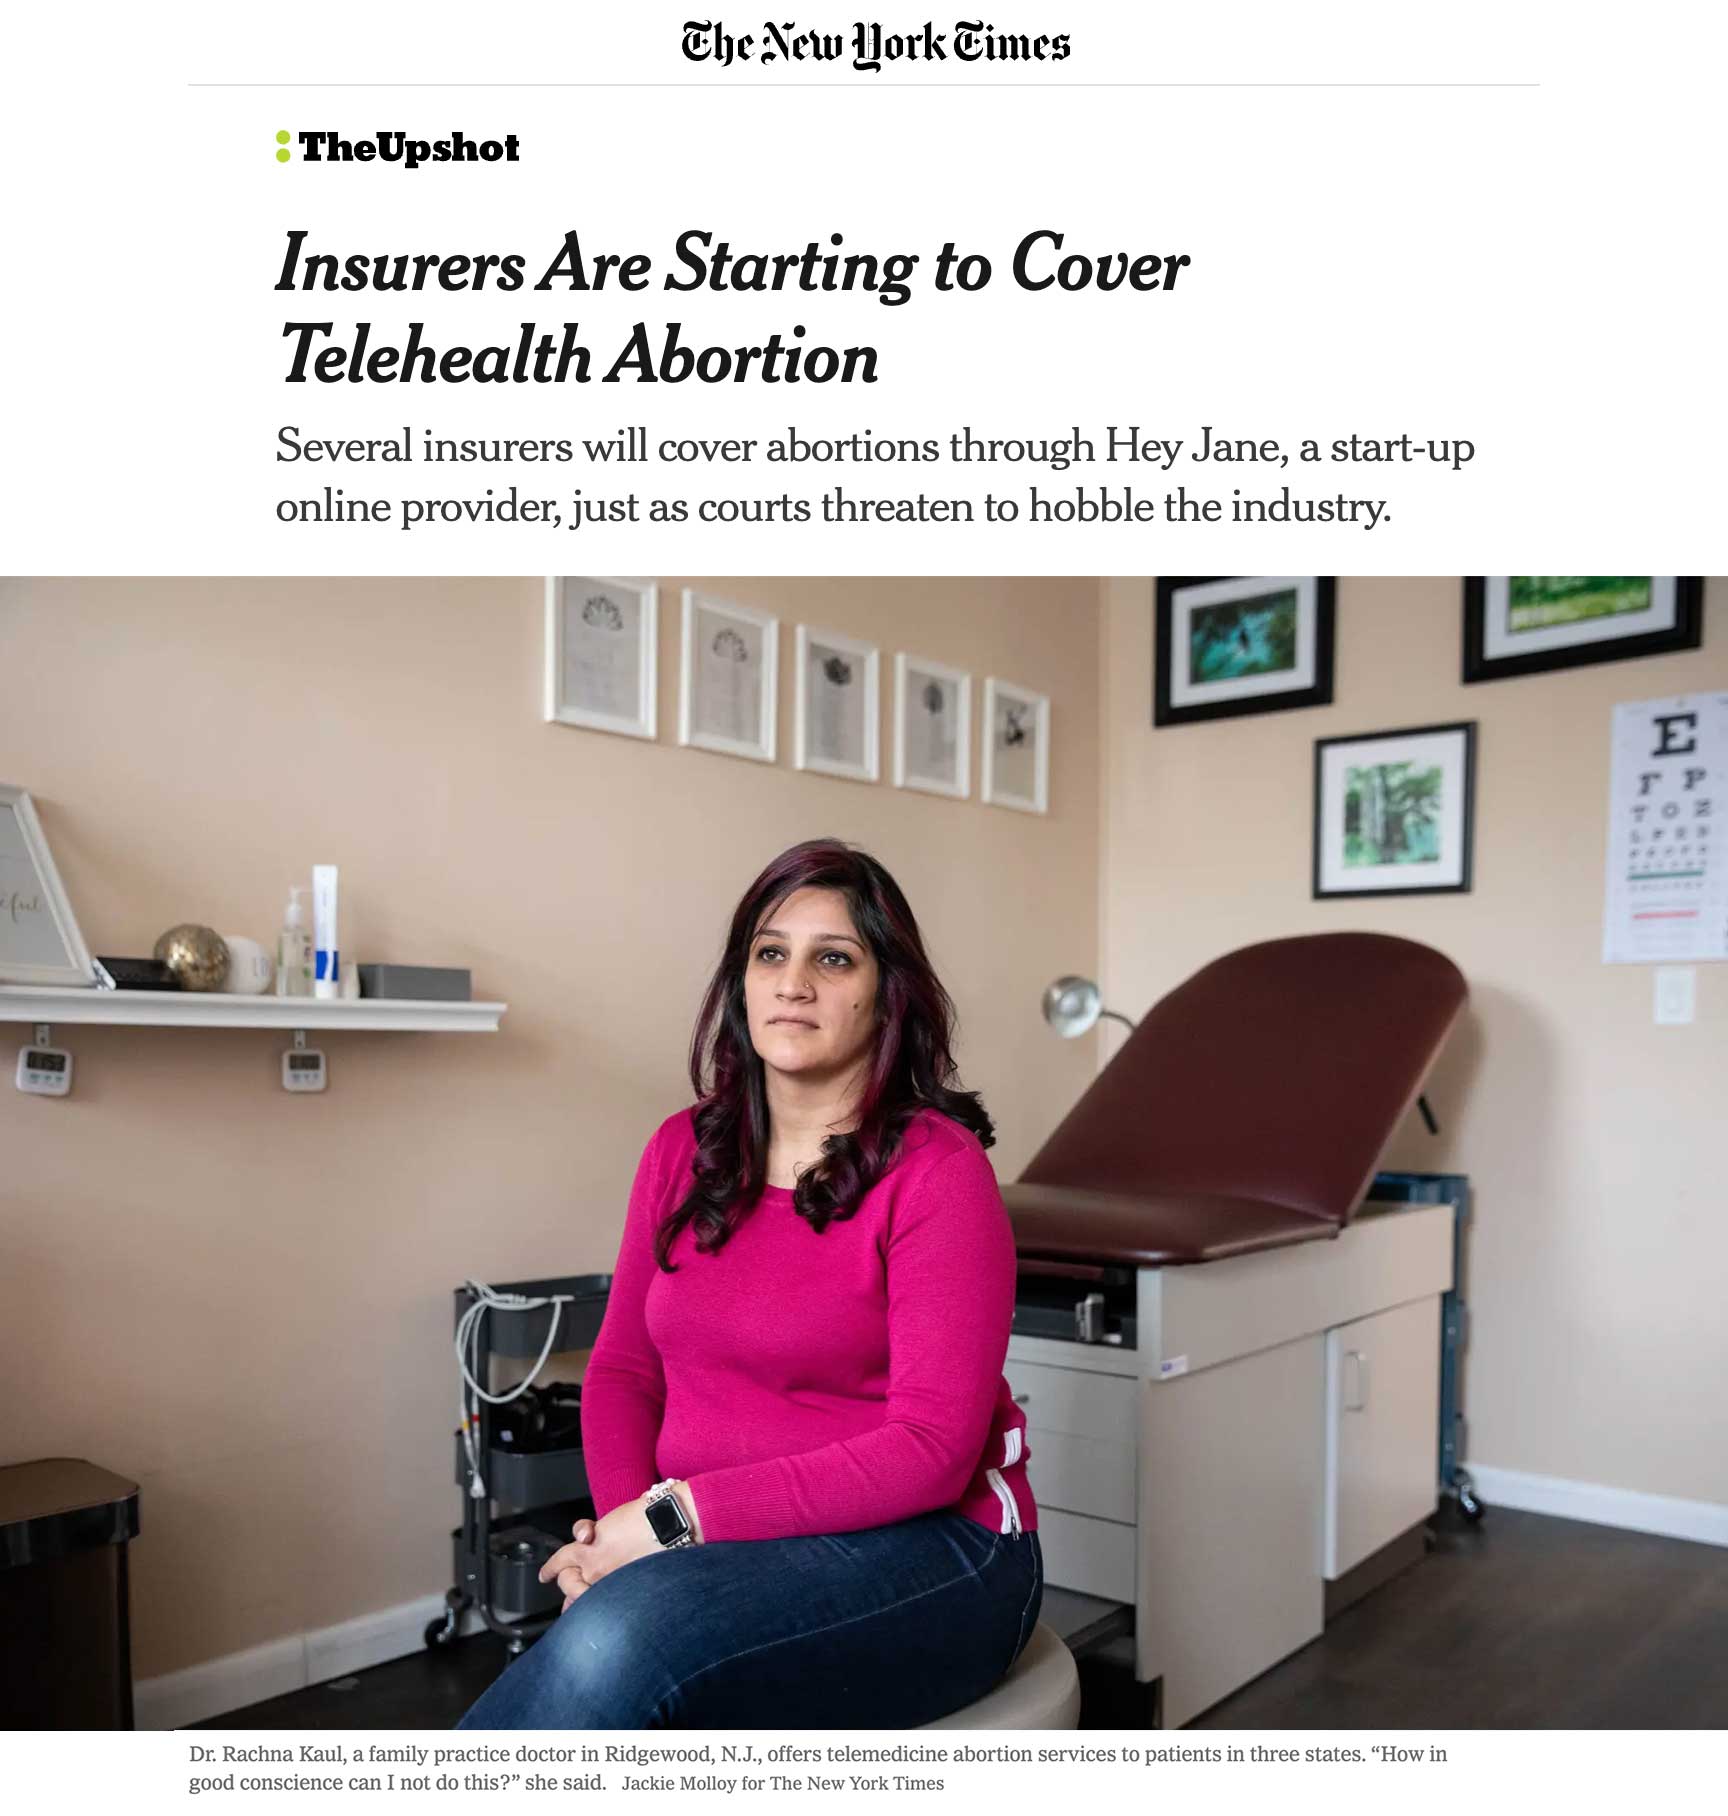 "Insurers are starting to cover telehealth abortion" - New York Times, Dr. Ruchi Kaul MD